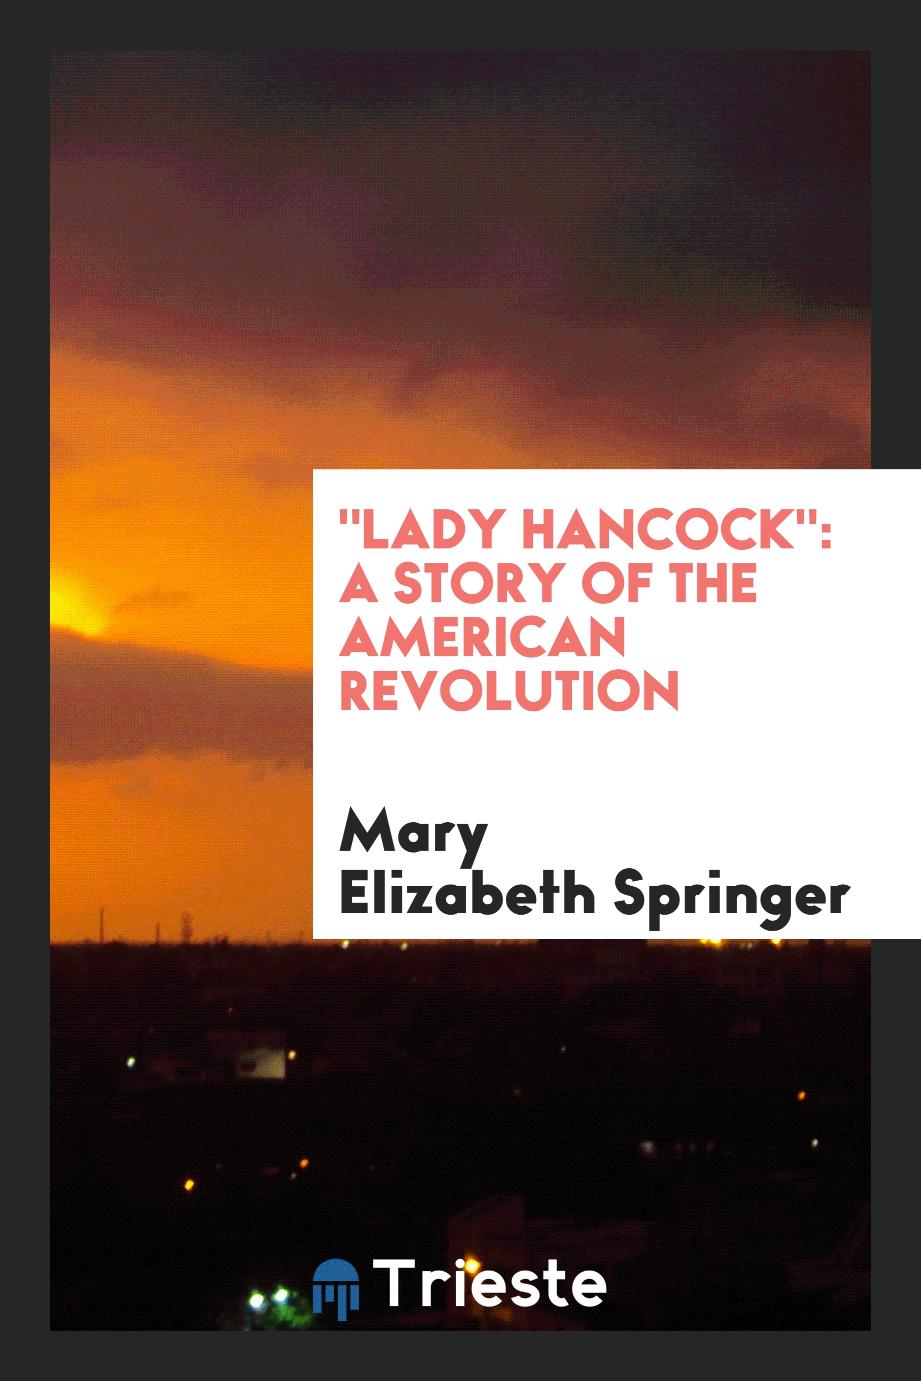 "Lady Hancock": A Story of the American Revolution